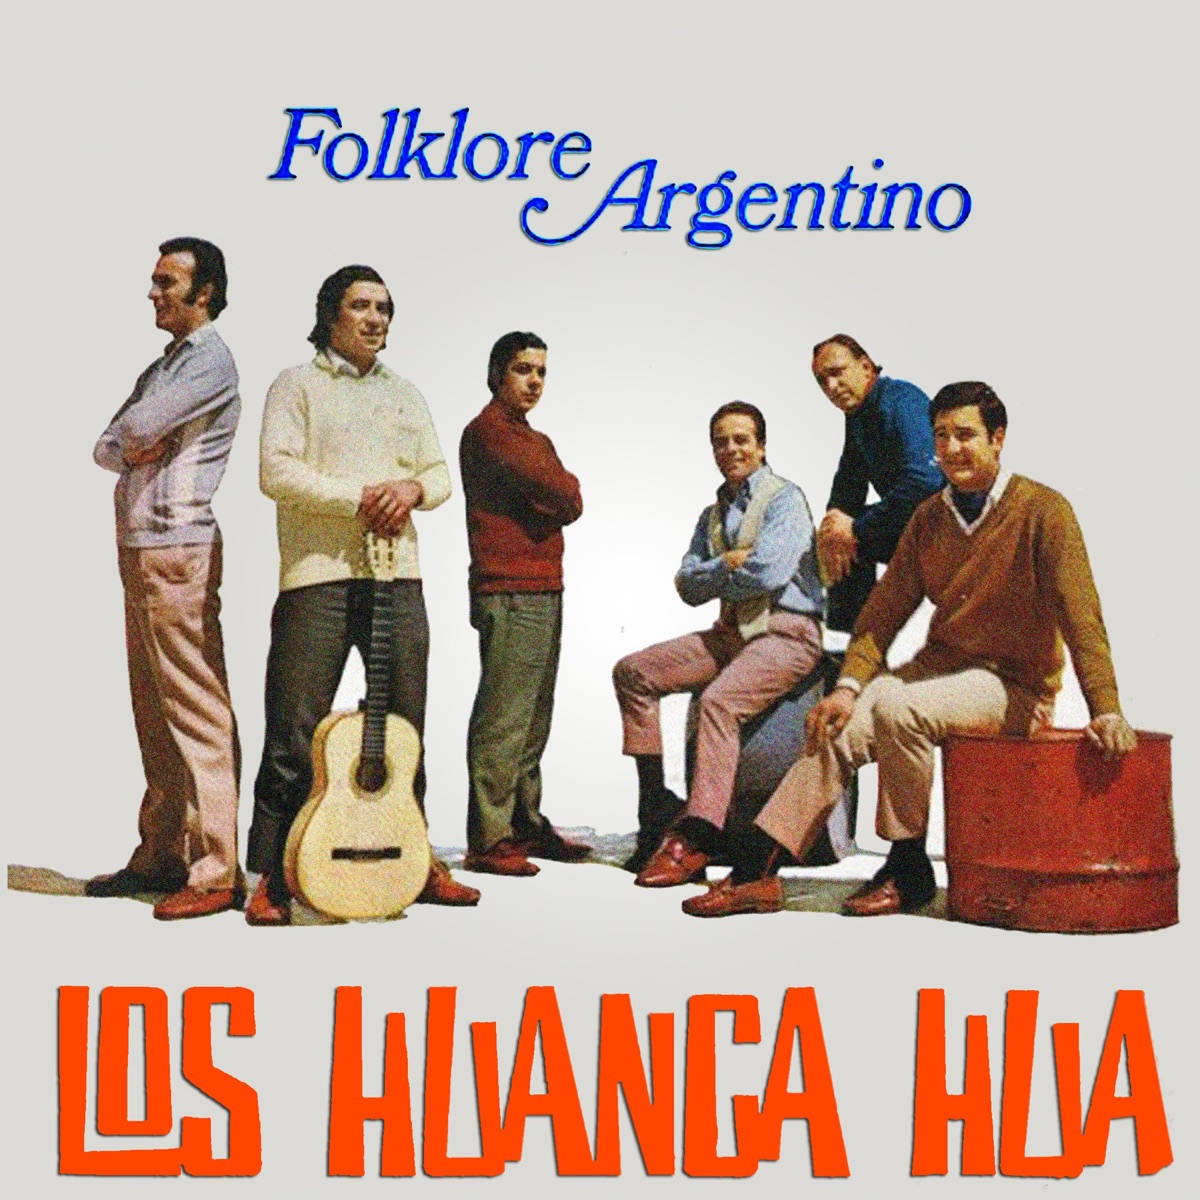 Folklore Argentino: Los Huanca Hua by Los Huanca Hua on Apple Music